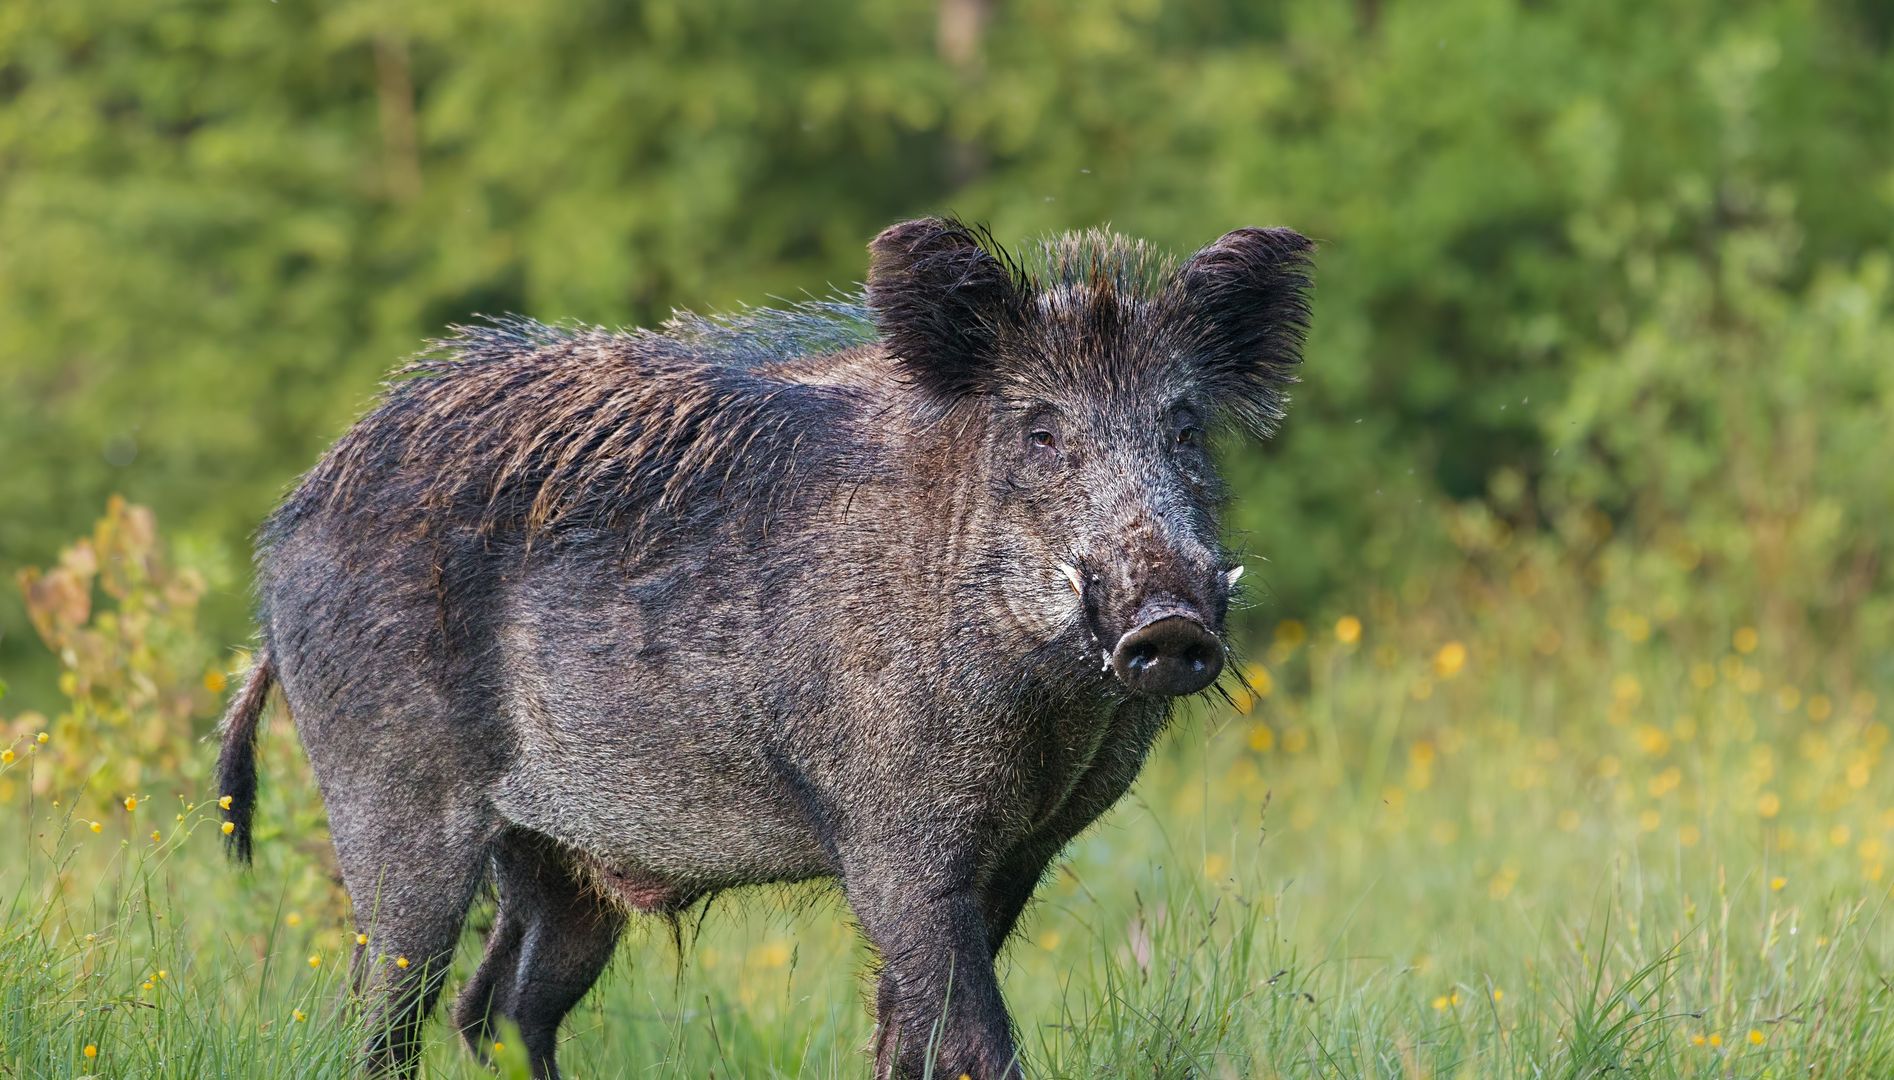 Adult male wild boar, sus scrofa, in spring fresh grassland with flowers. Dangerous wild animal with big tusks in natural forest green summer environment. Isolated strong male on blurred background. (Adult male wild boar, sus scrofa, in spring fresh g